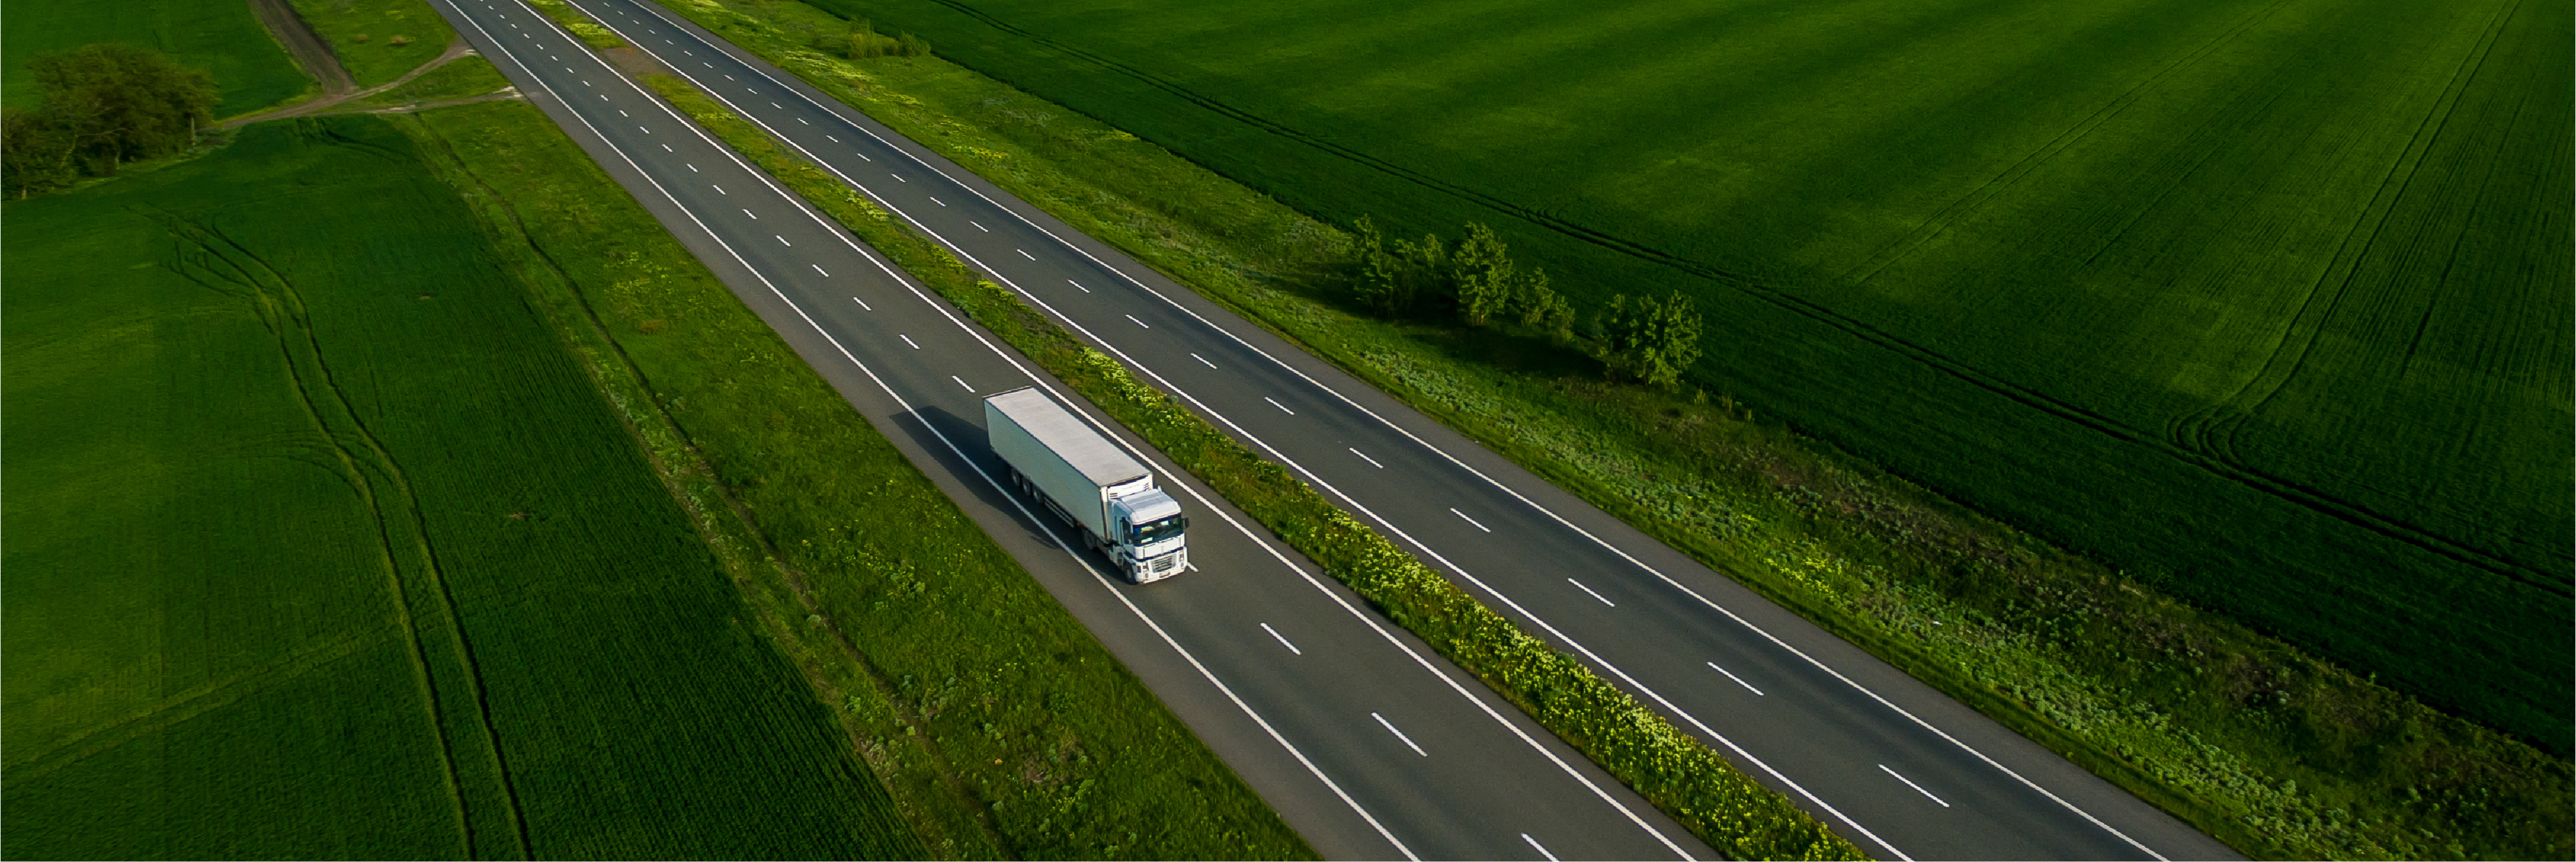 A truck traveling on a road through green fields, representing inflation and the role of digital technologies.